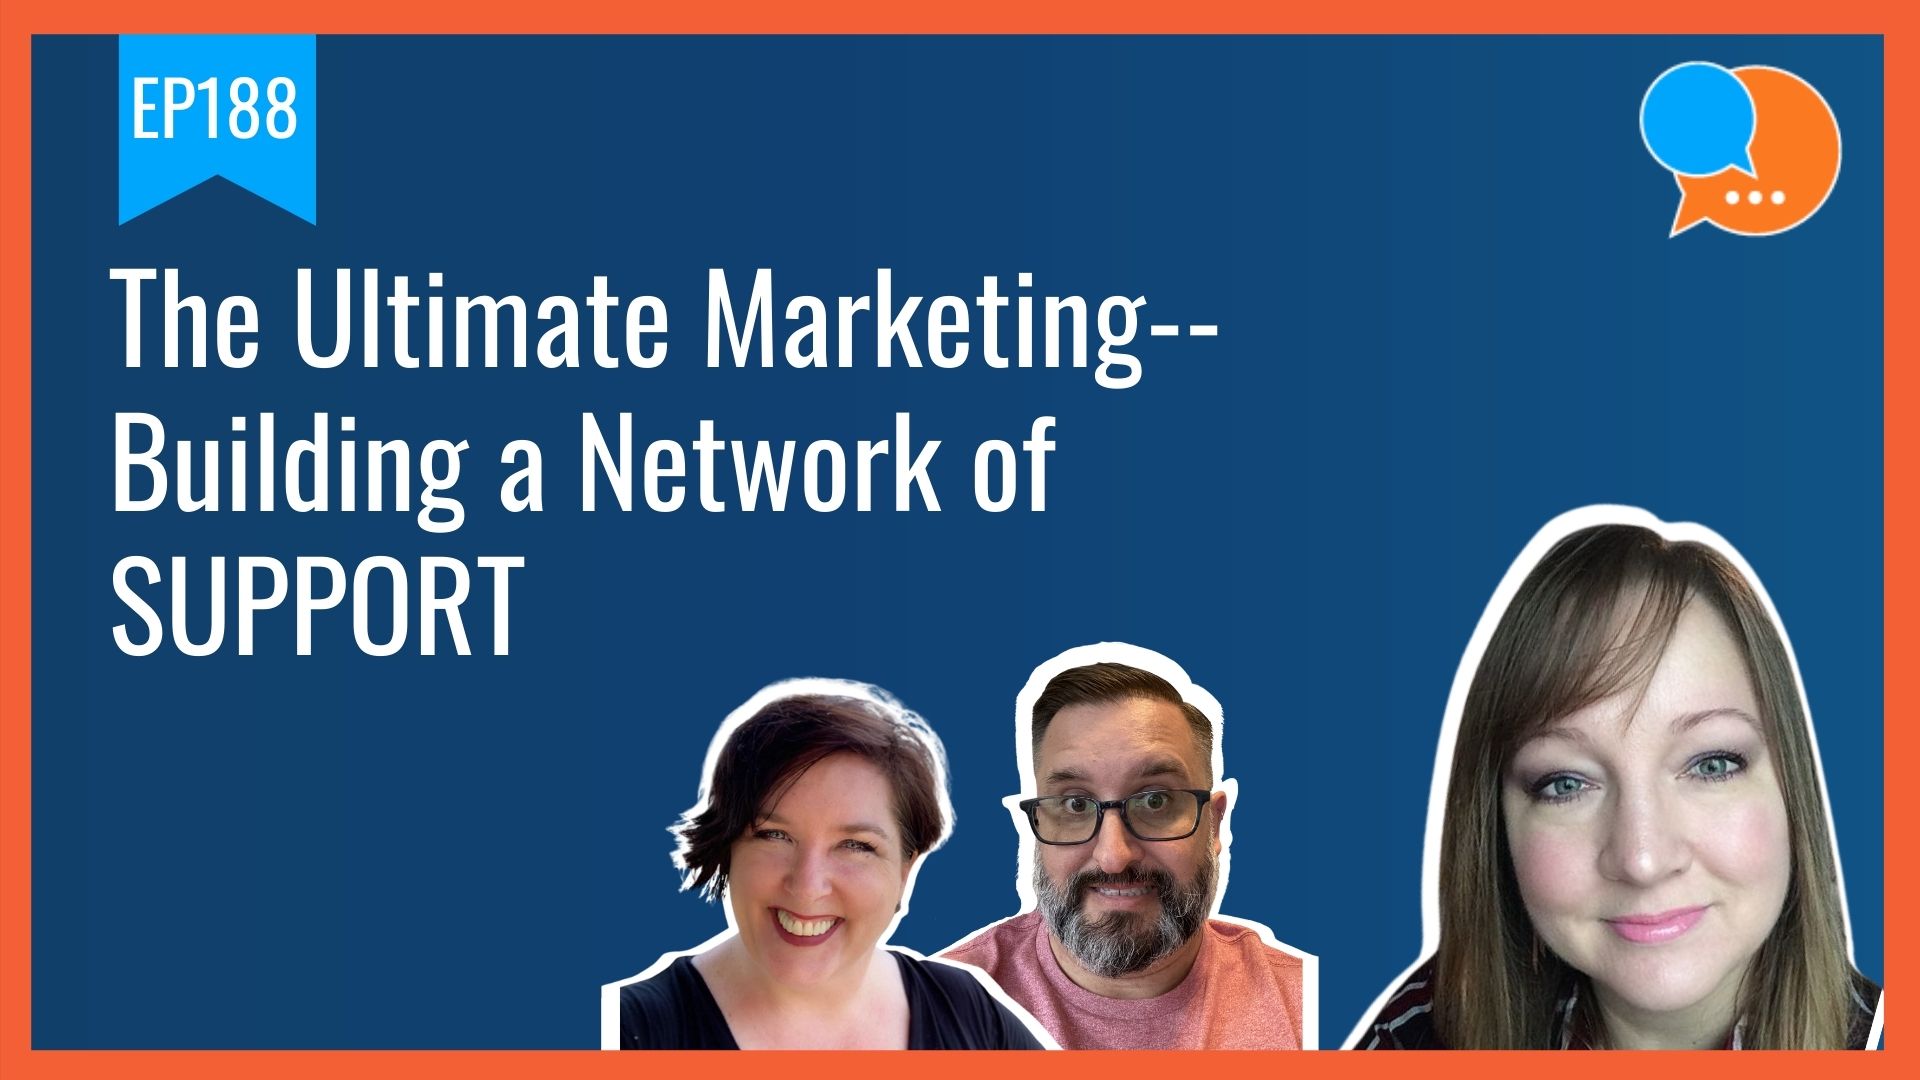 EP188 – The Ultimate Marketing–Building a Network of SUPPORT